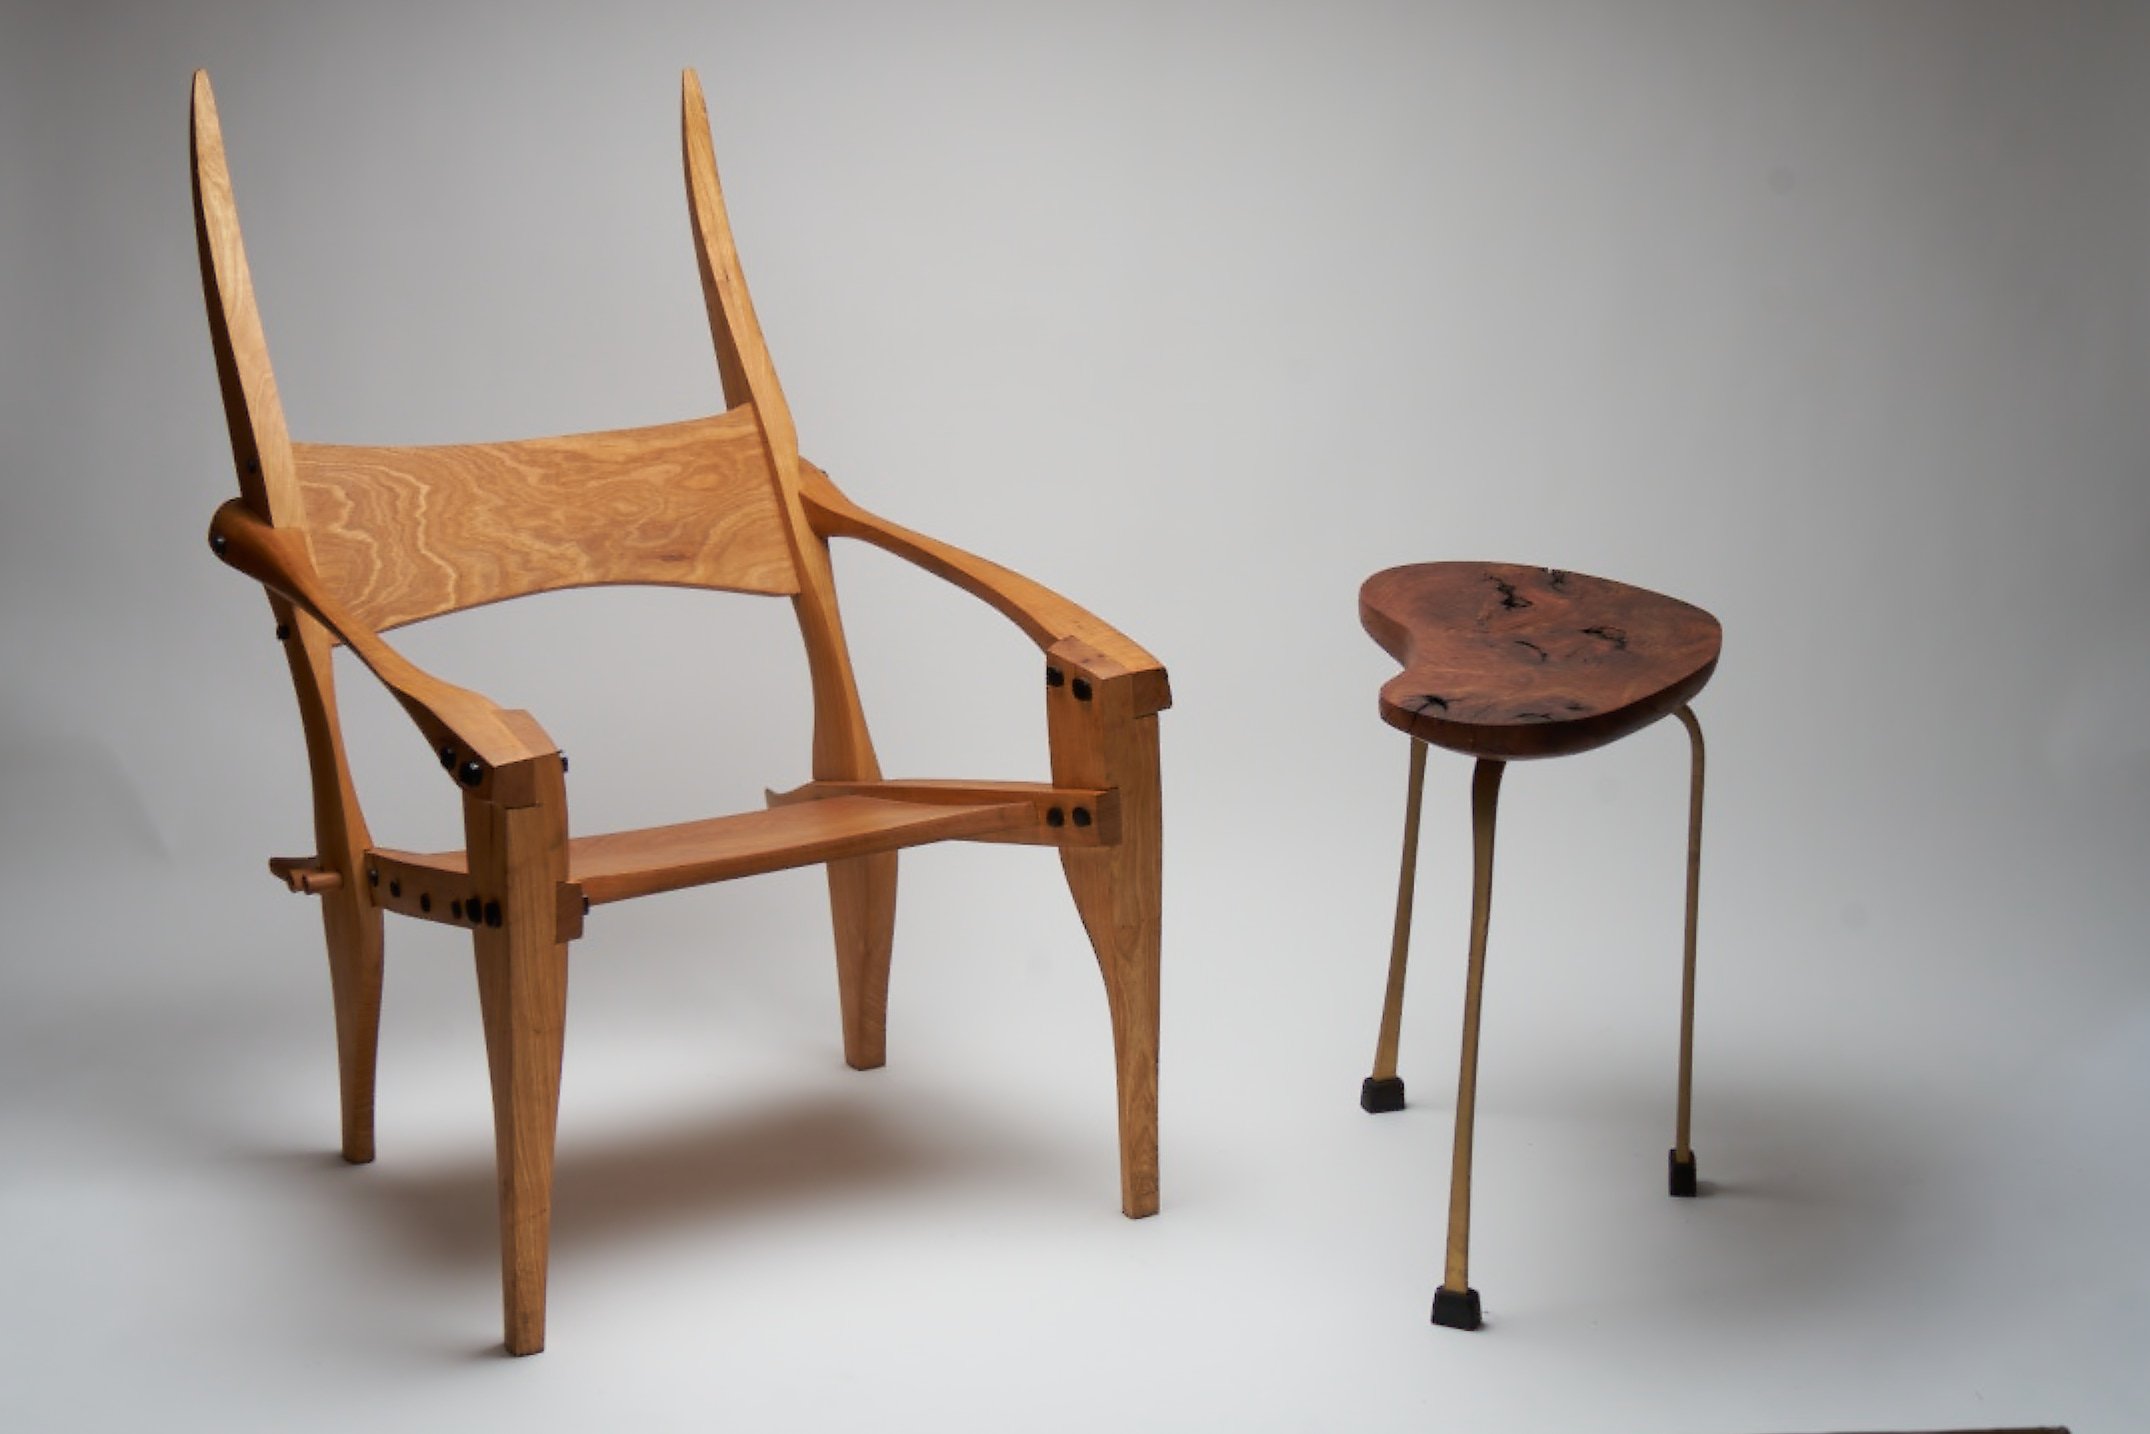 julio-martinez-barnetche-west1-armchair-and-whale-side-table-marionfriedmanngallery225152-lr.jpg